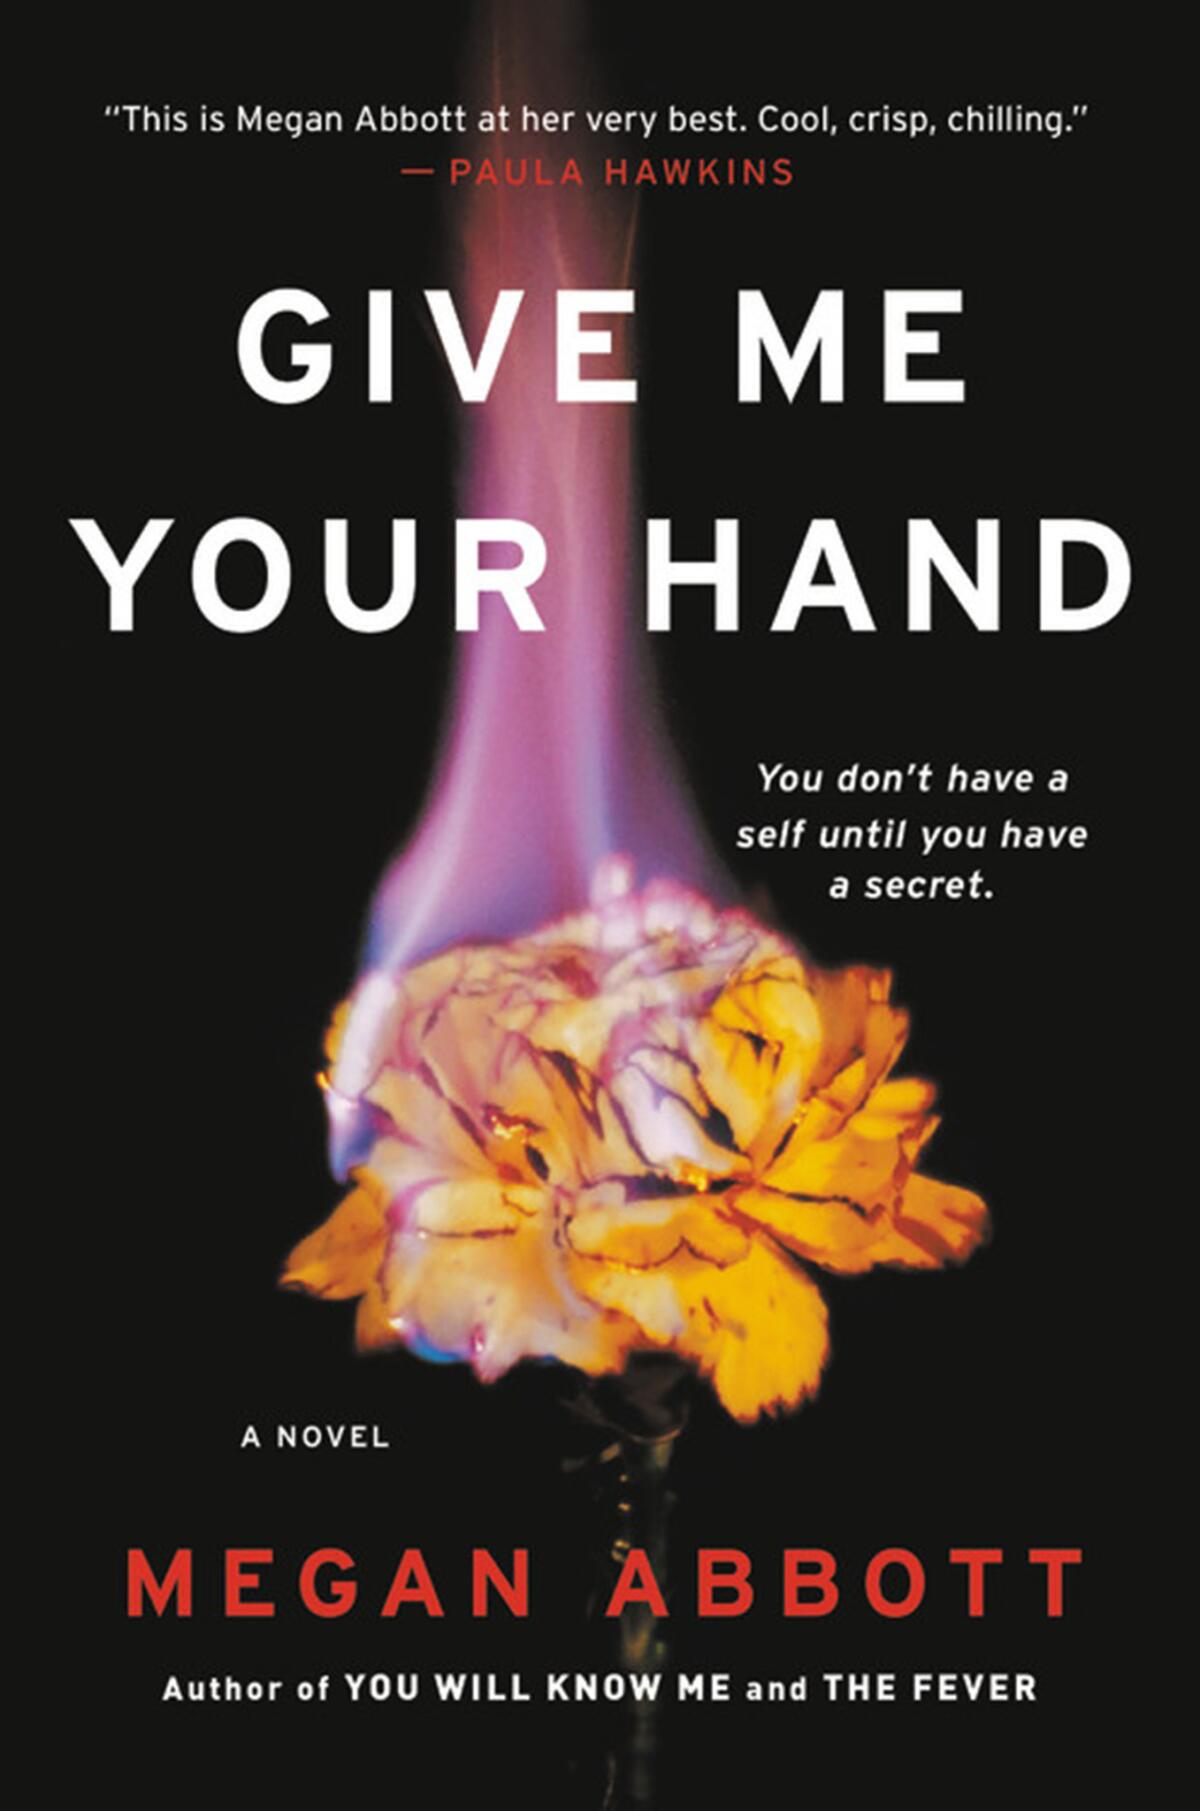 "Give Me Your Hand" by Megan Abbott (Little, Brown and Co).